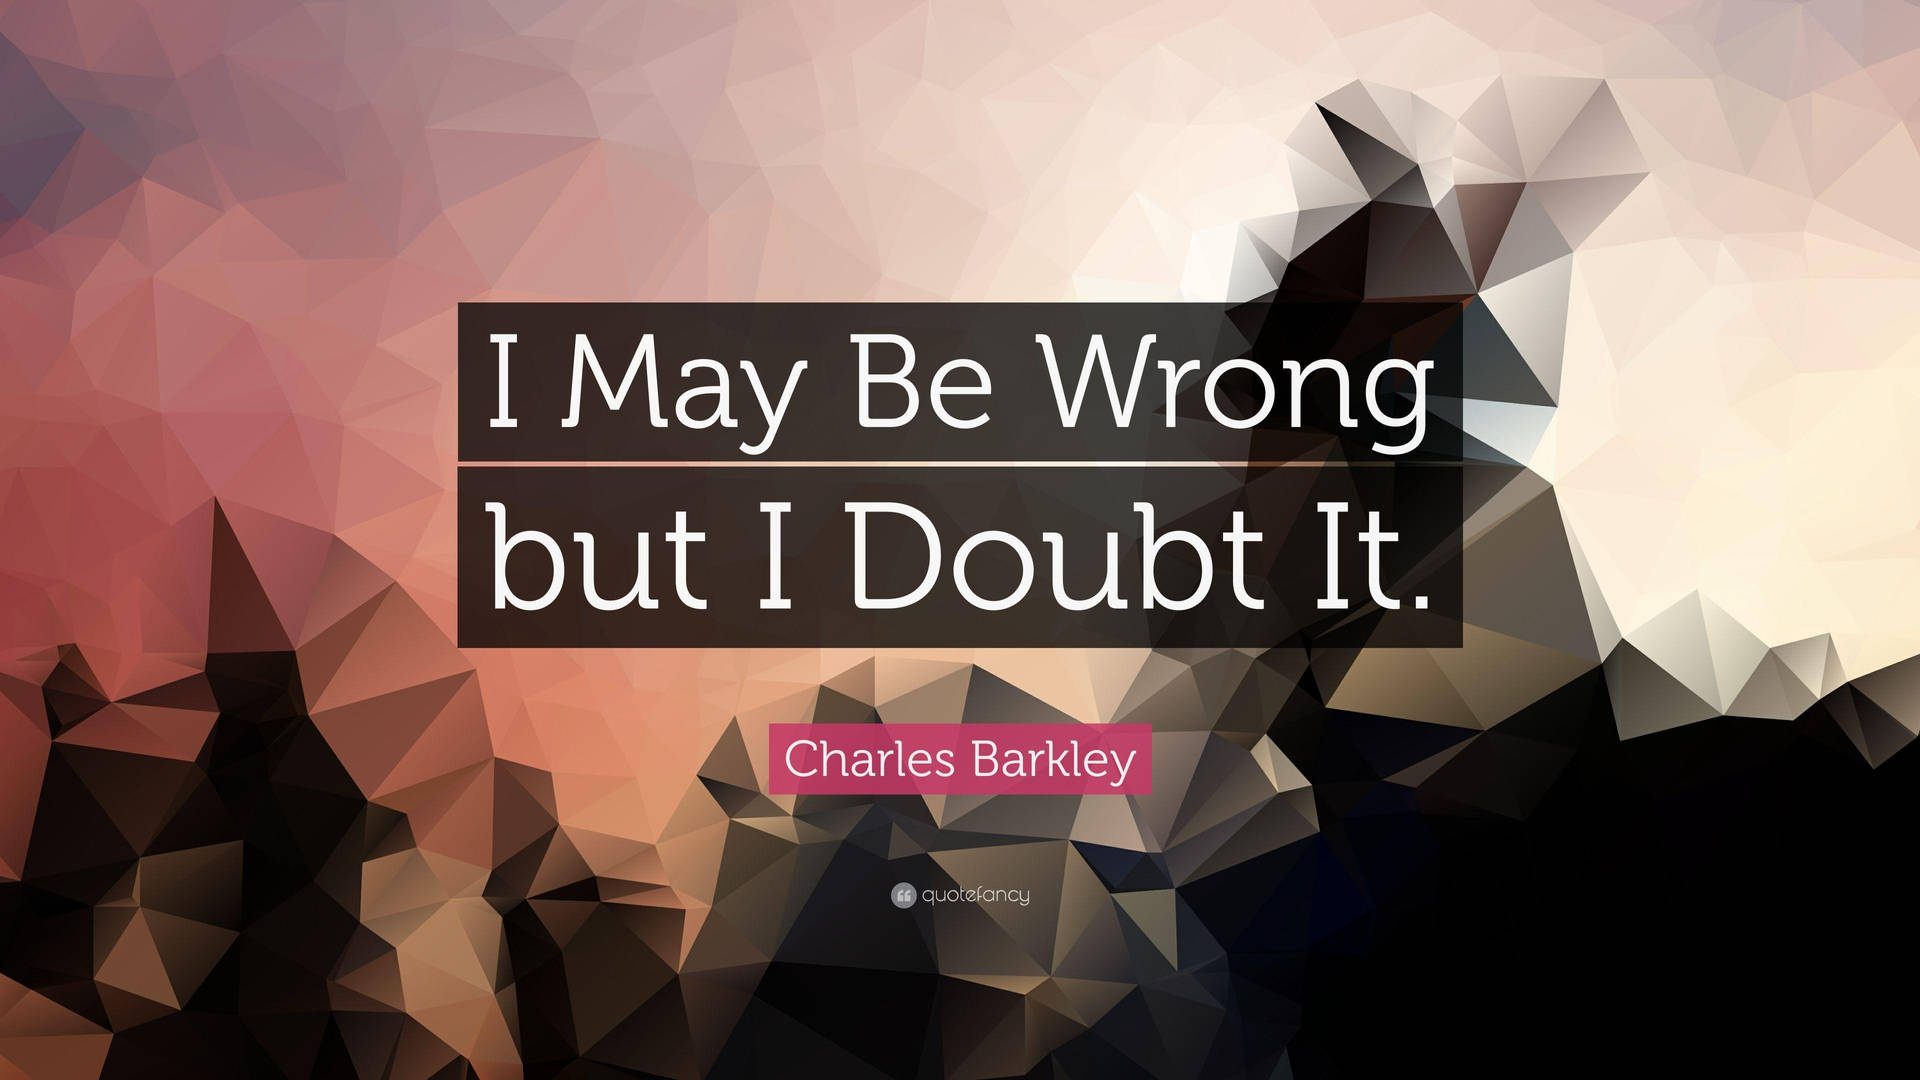 Charles Barkley Cool Quotes Doubt Abstract Art Wallpaper